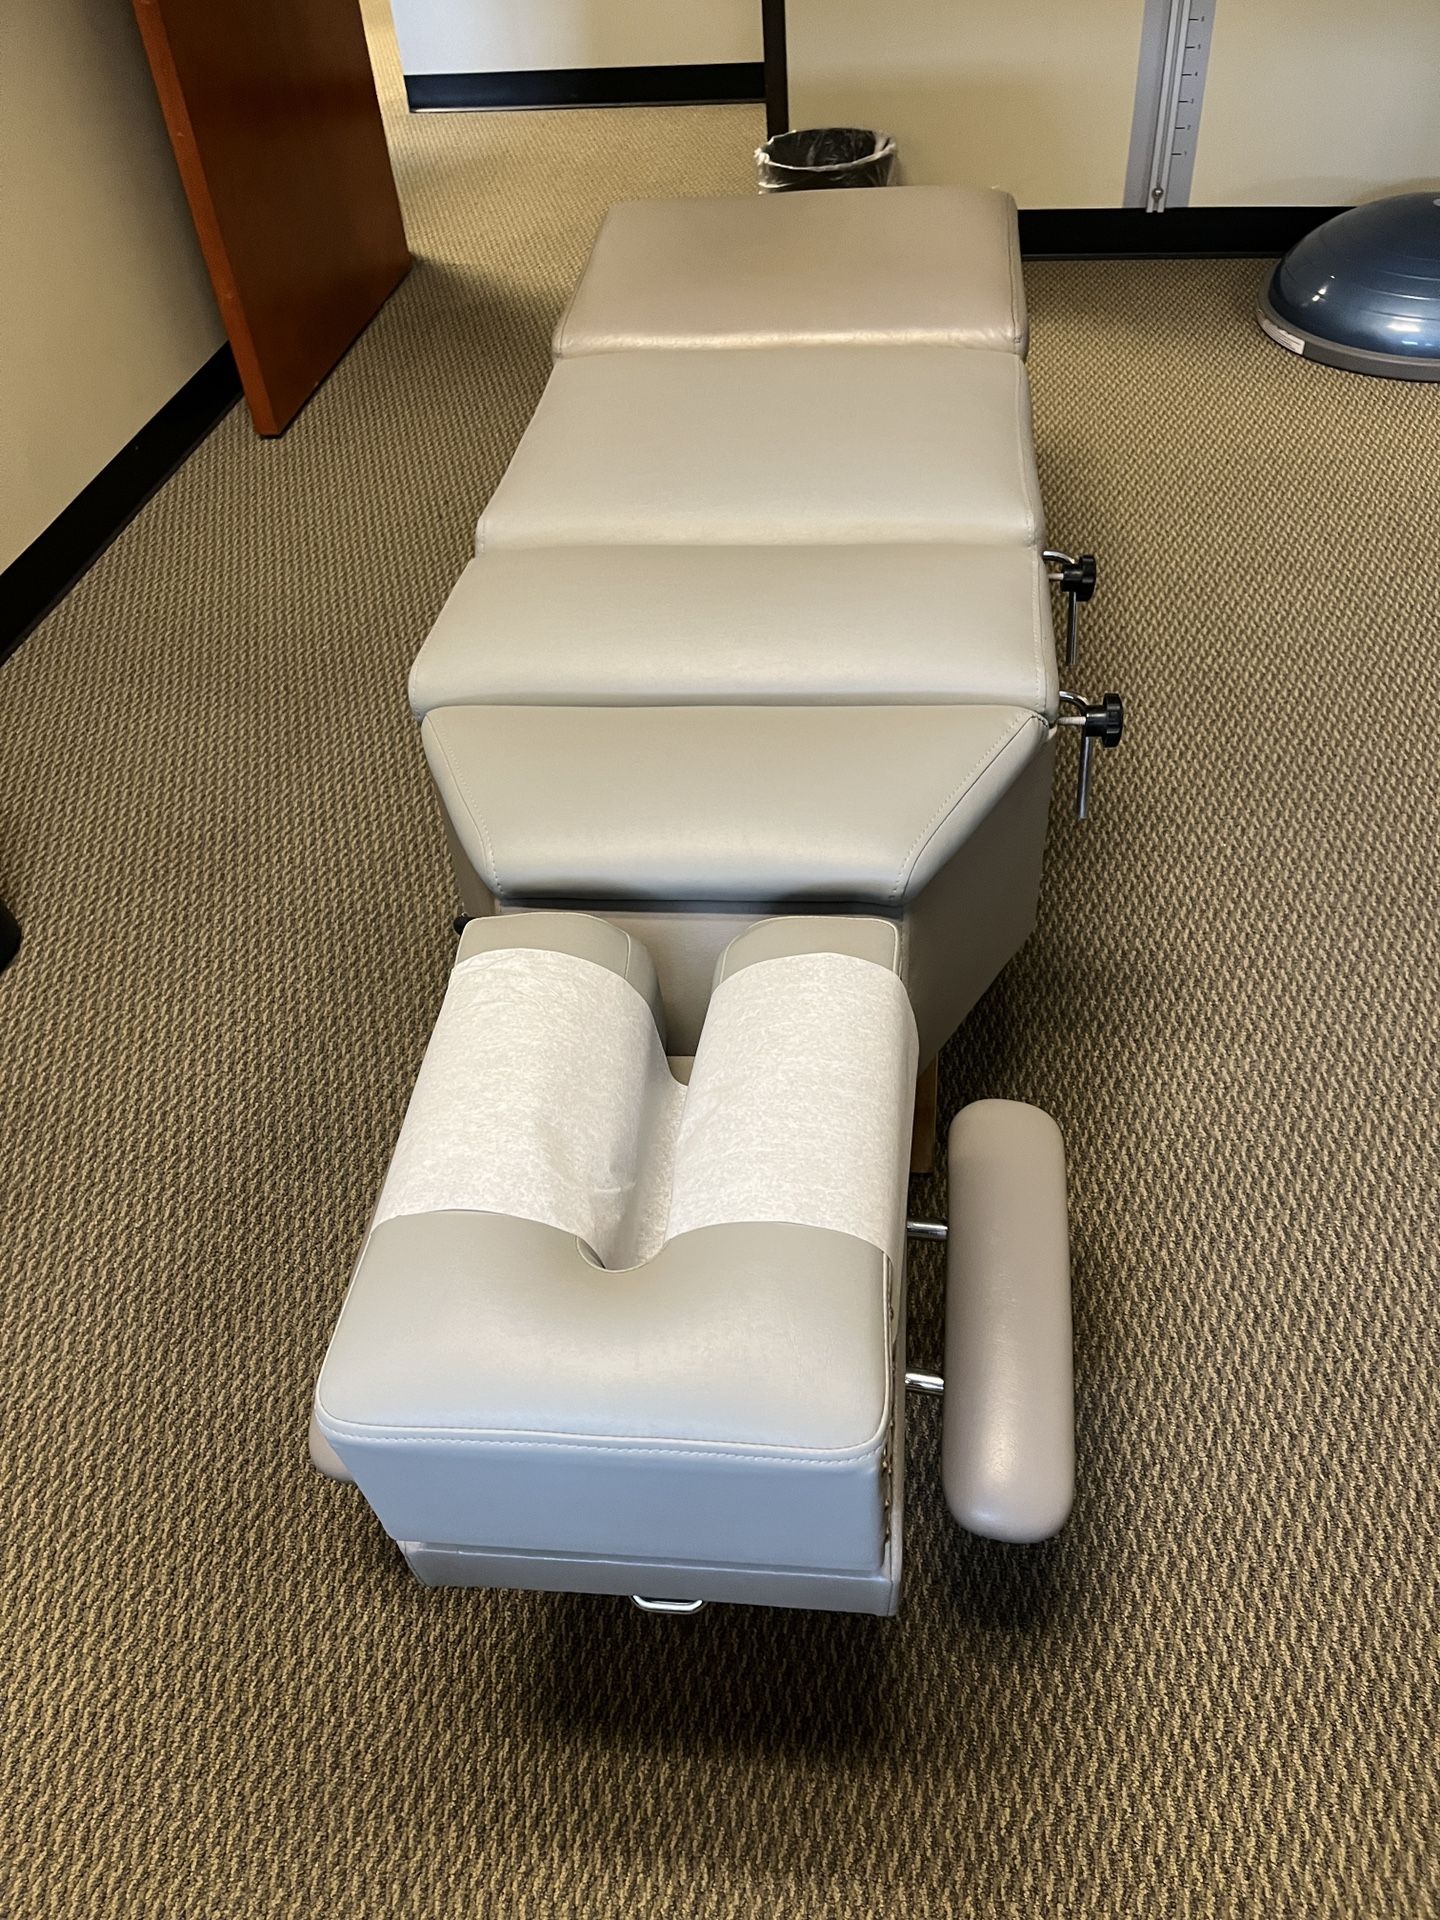 Chiropractic Adjusting Table For Sale!